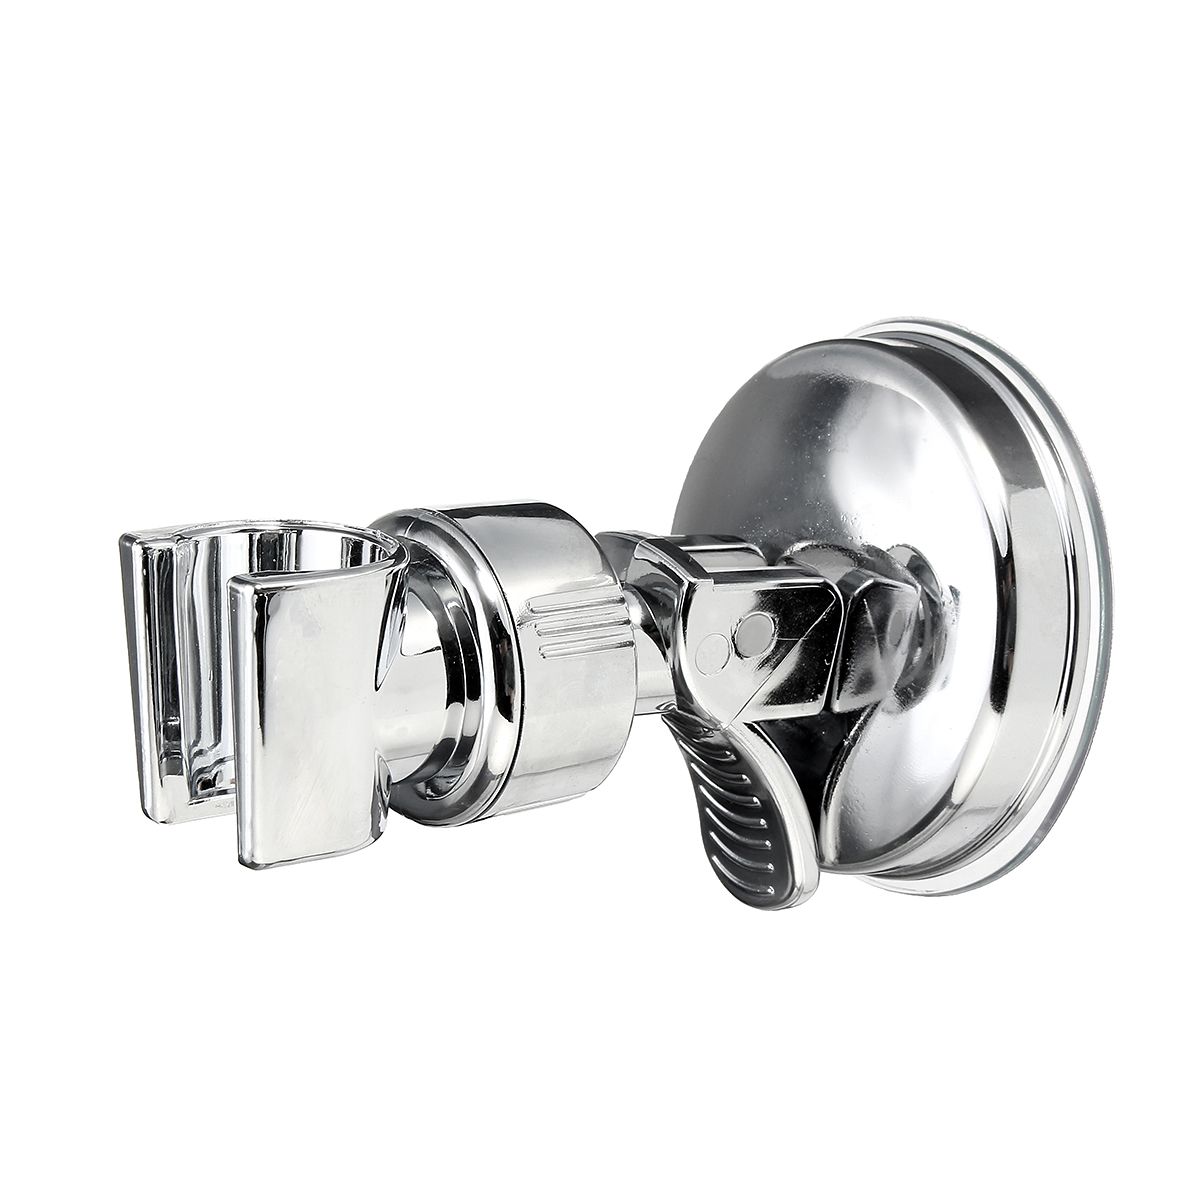 Adjustable-ABS-Plastic-Shower-Head-Holder-With-Suction-Cup-Wall-Handheld-Shower-Water-Hose-Bracket-1305583